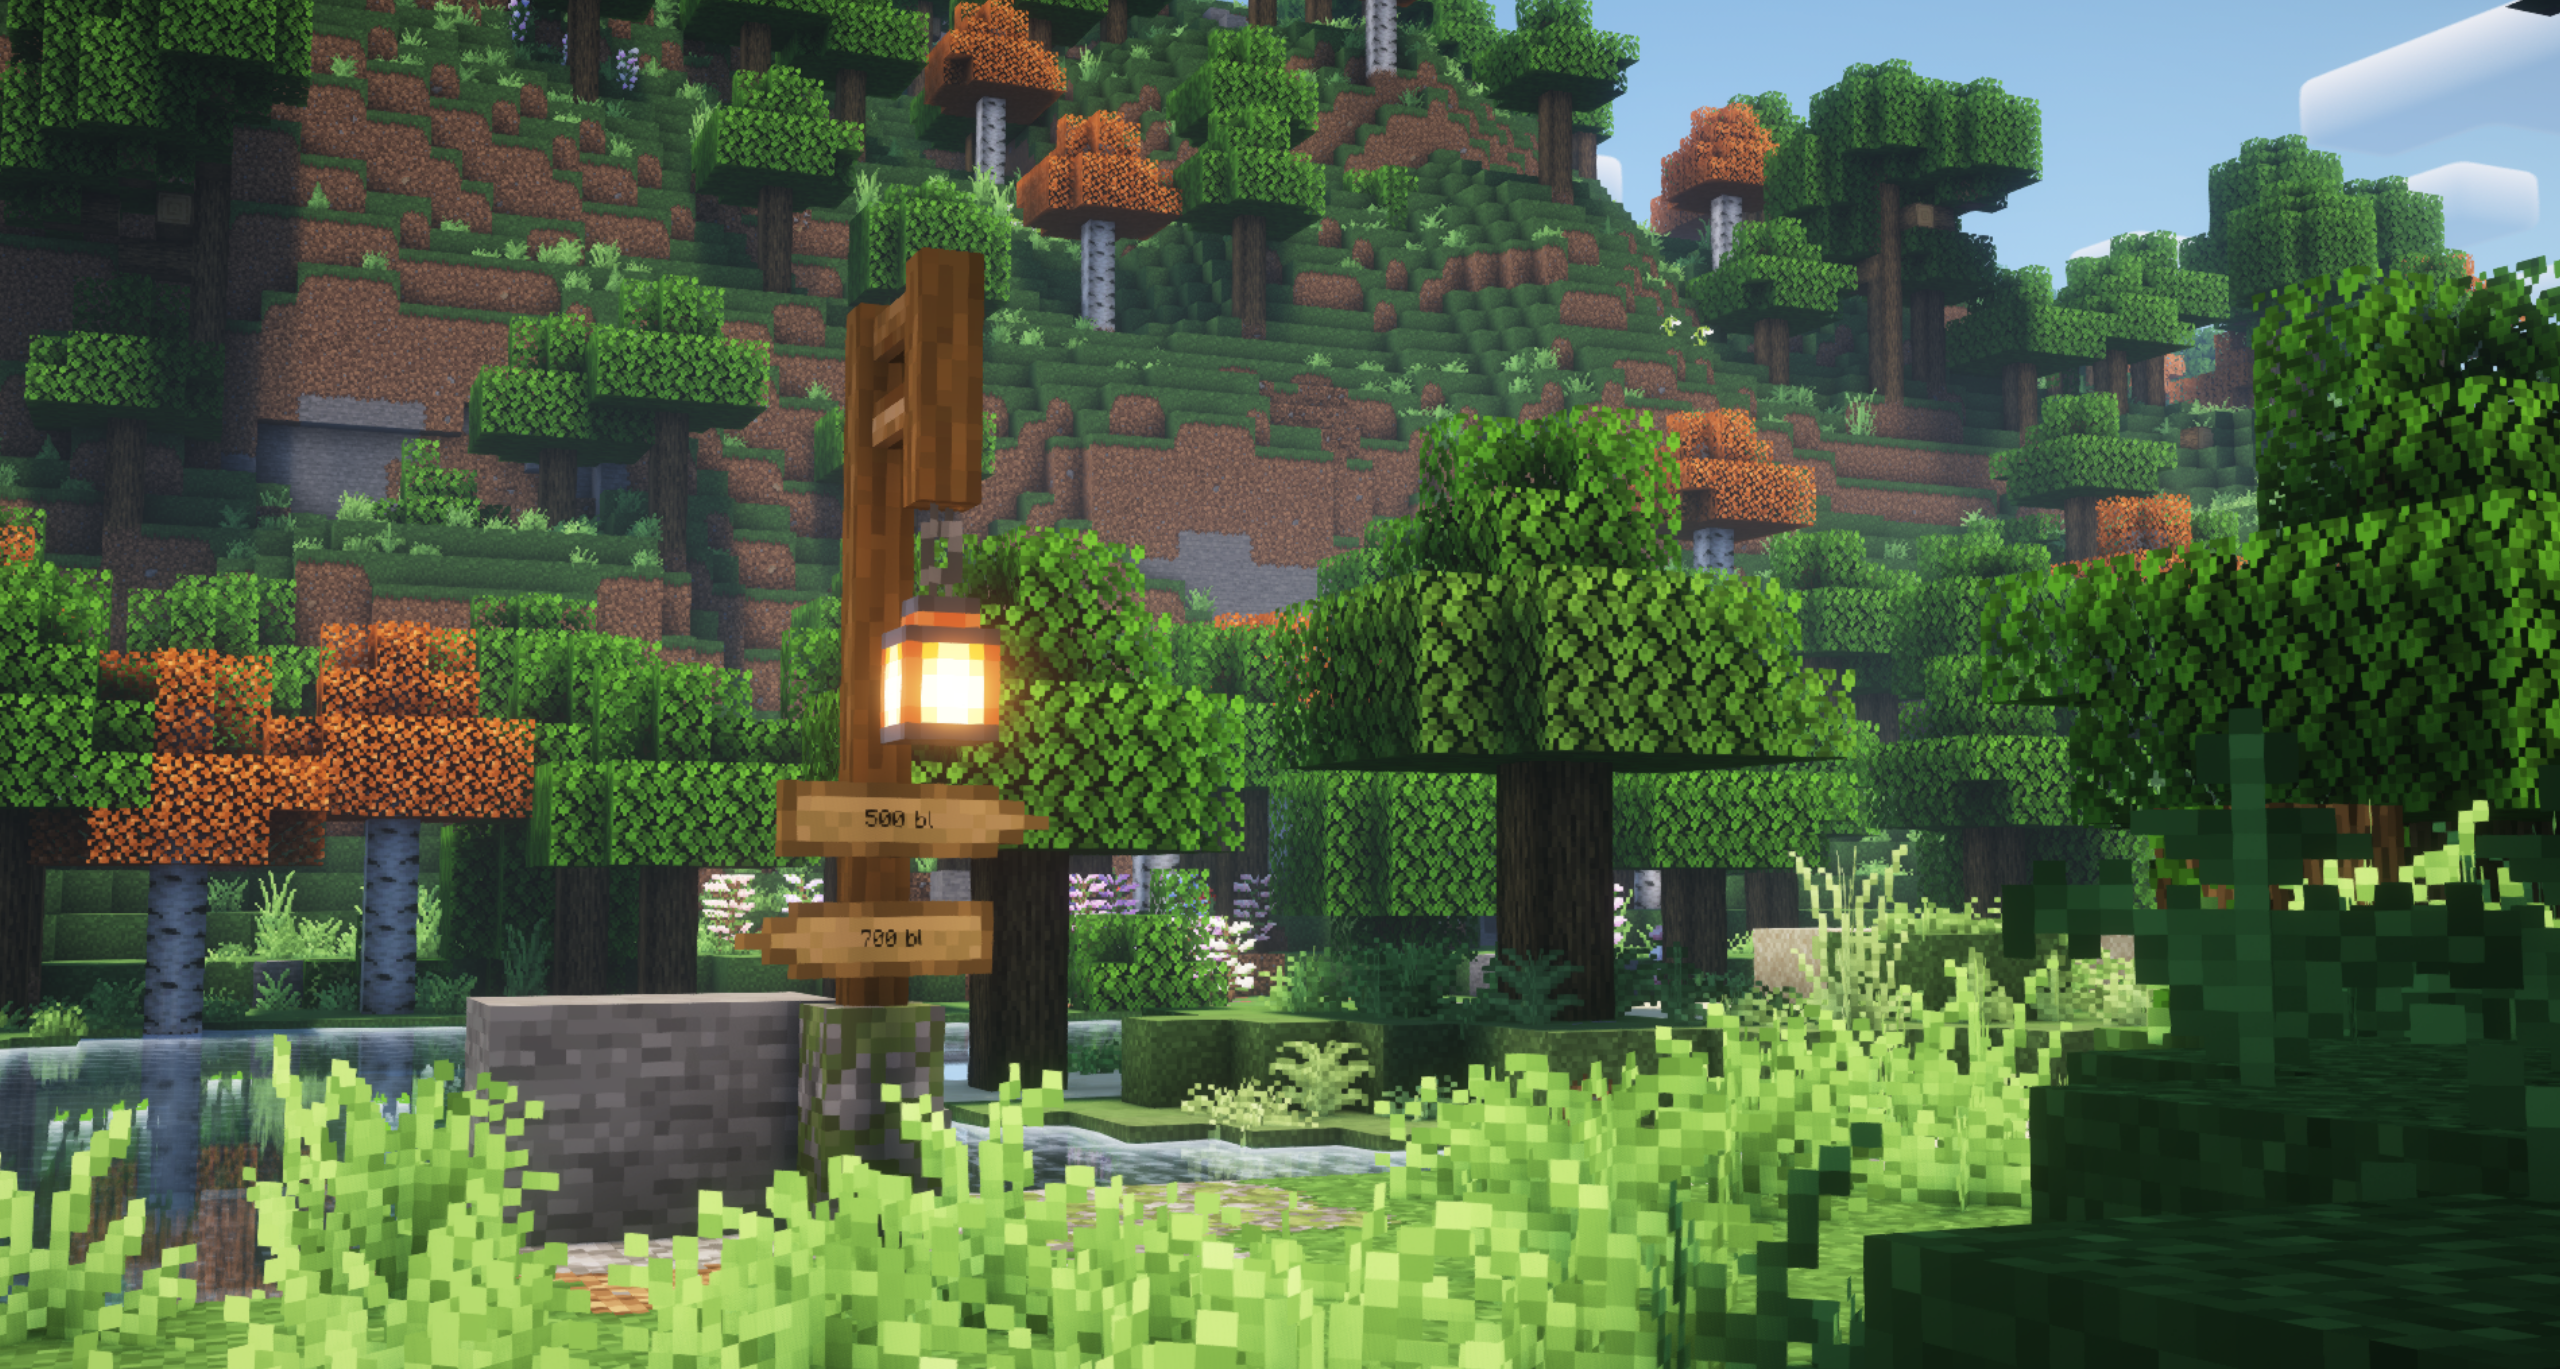 The minecraft overwold with shaders